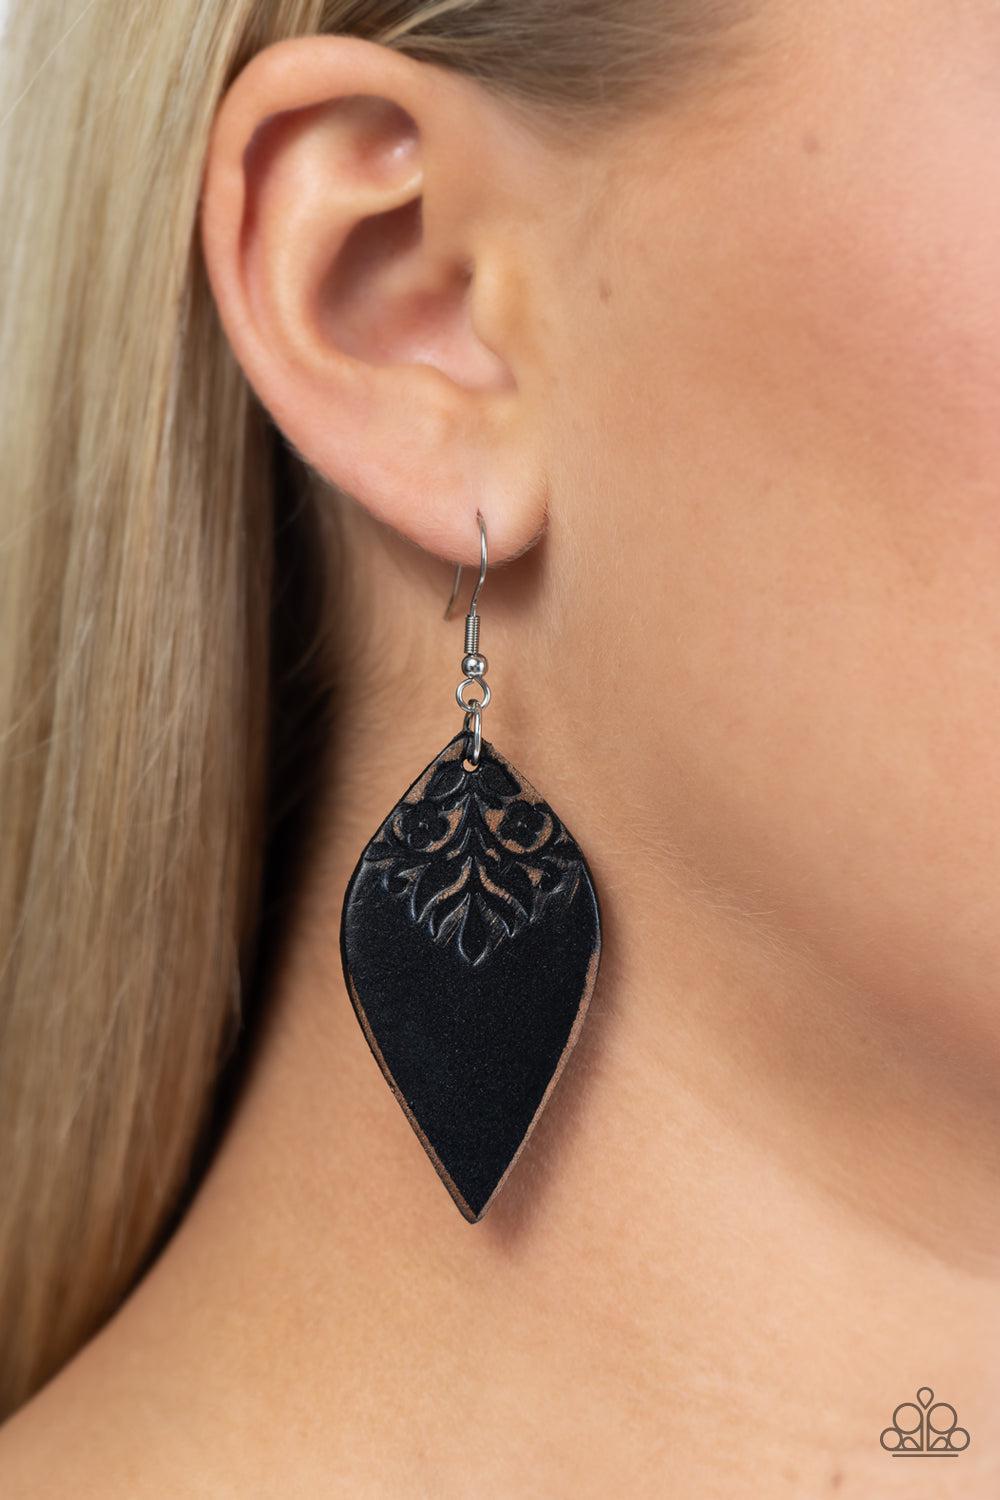 Naturally Nostalgic Black Leather Earrings - Paparazzi Accessories-on model - CarasShop.com - $5 Jewelry by Cara Jewels